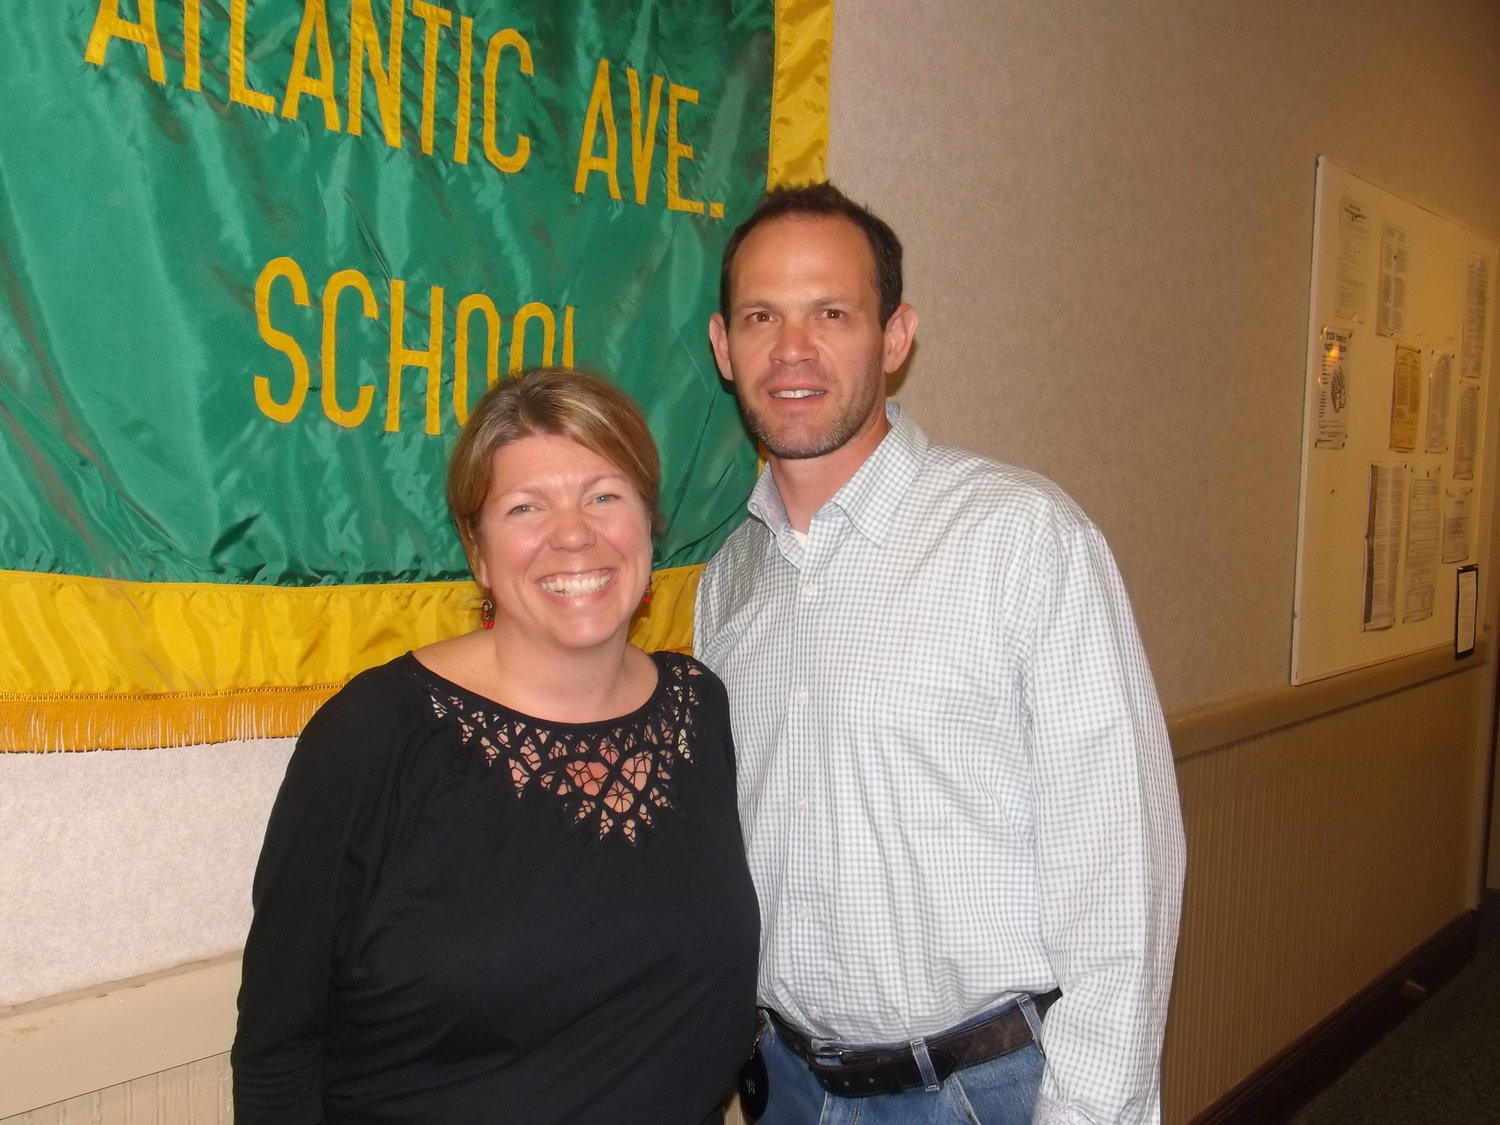 Board of Education Trustee Heather Hanson and President William Belmont are running for re-election to the Lynbrook school board.